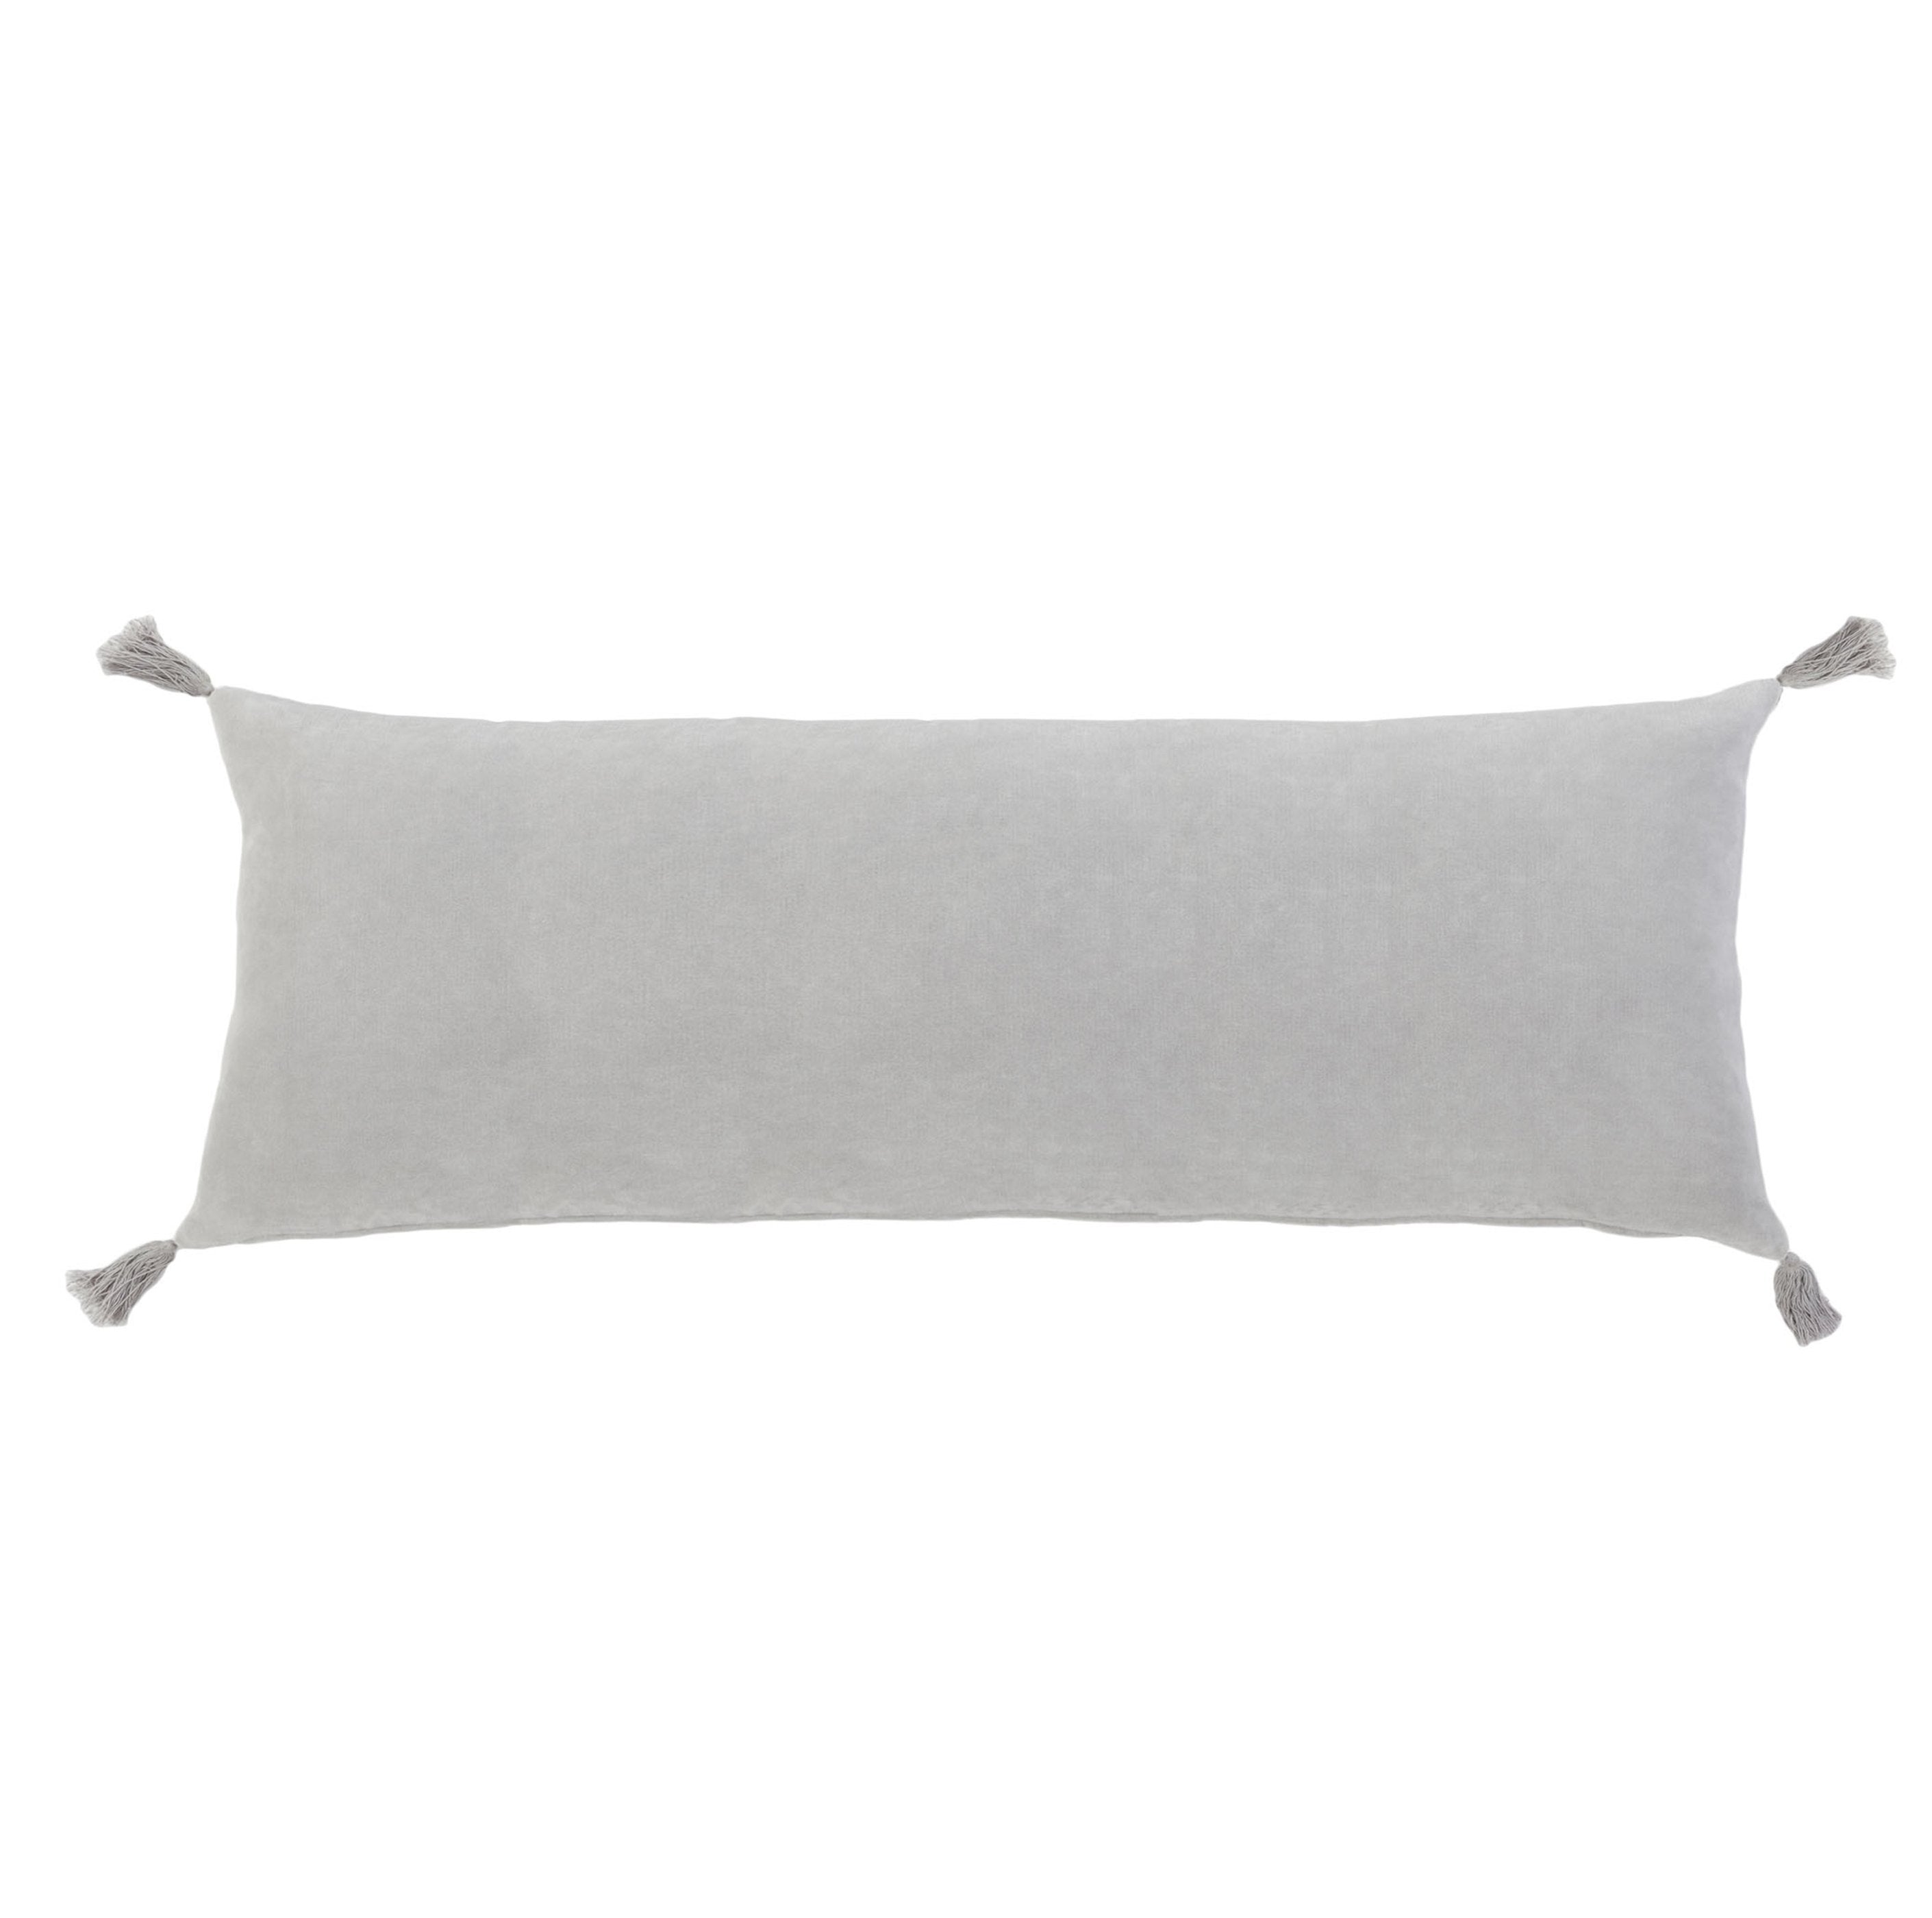 Bianca 14"x40" Pillow with Insert -Light Grey Color -Pom Pom at Home